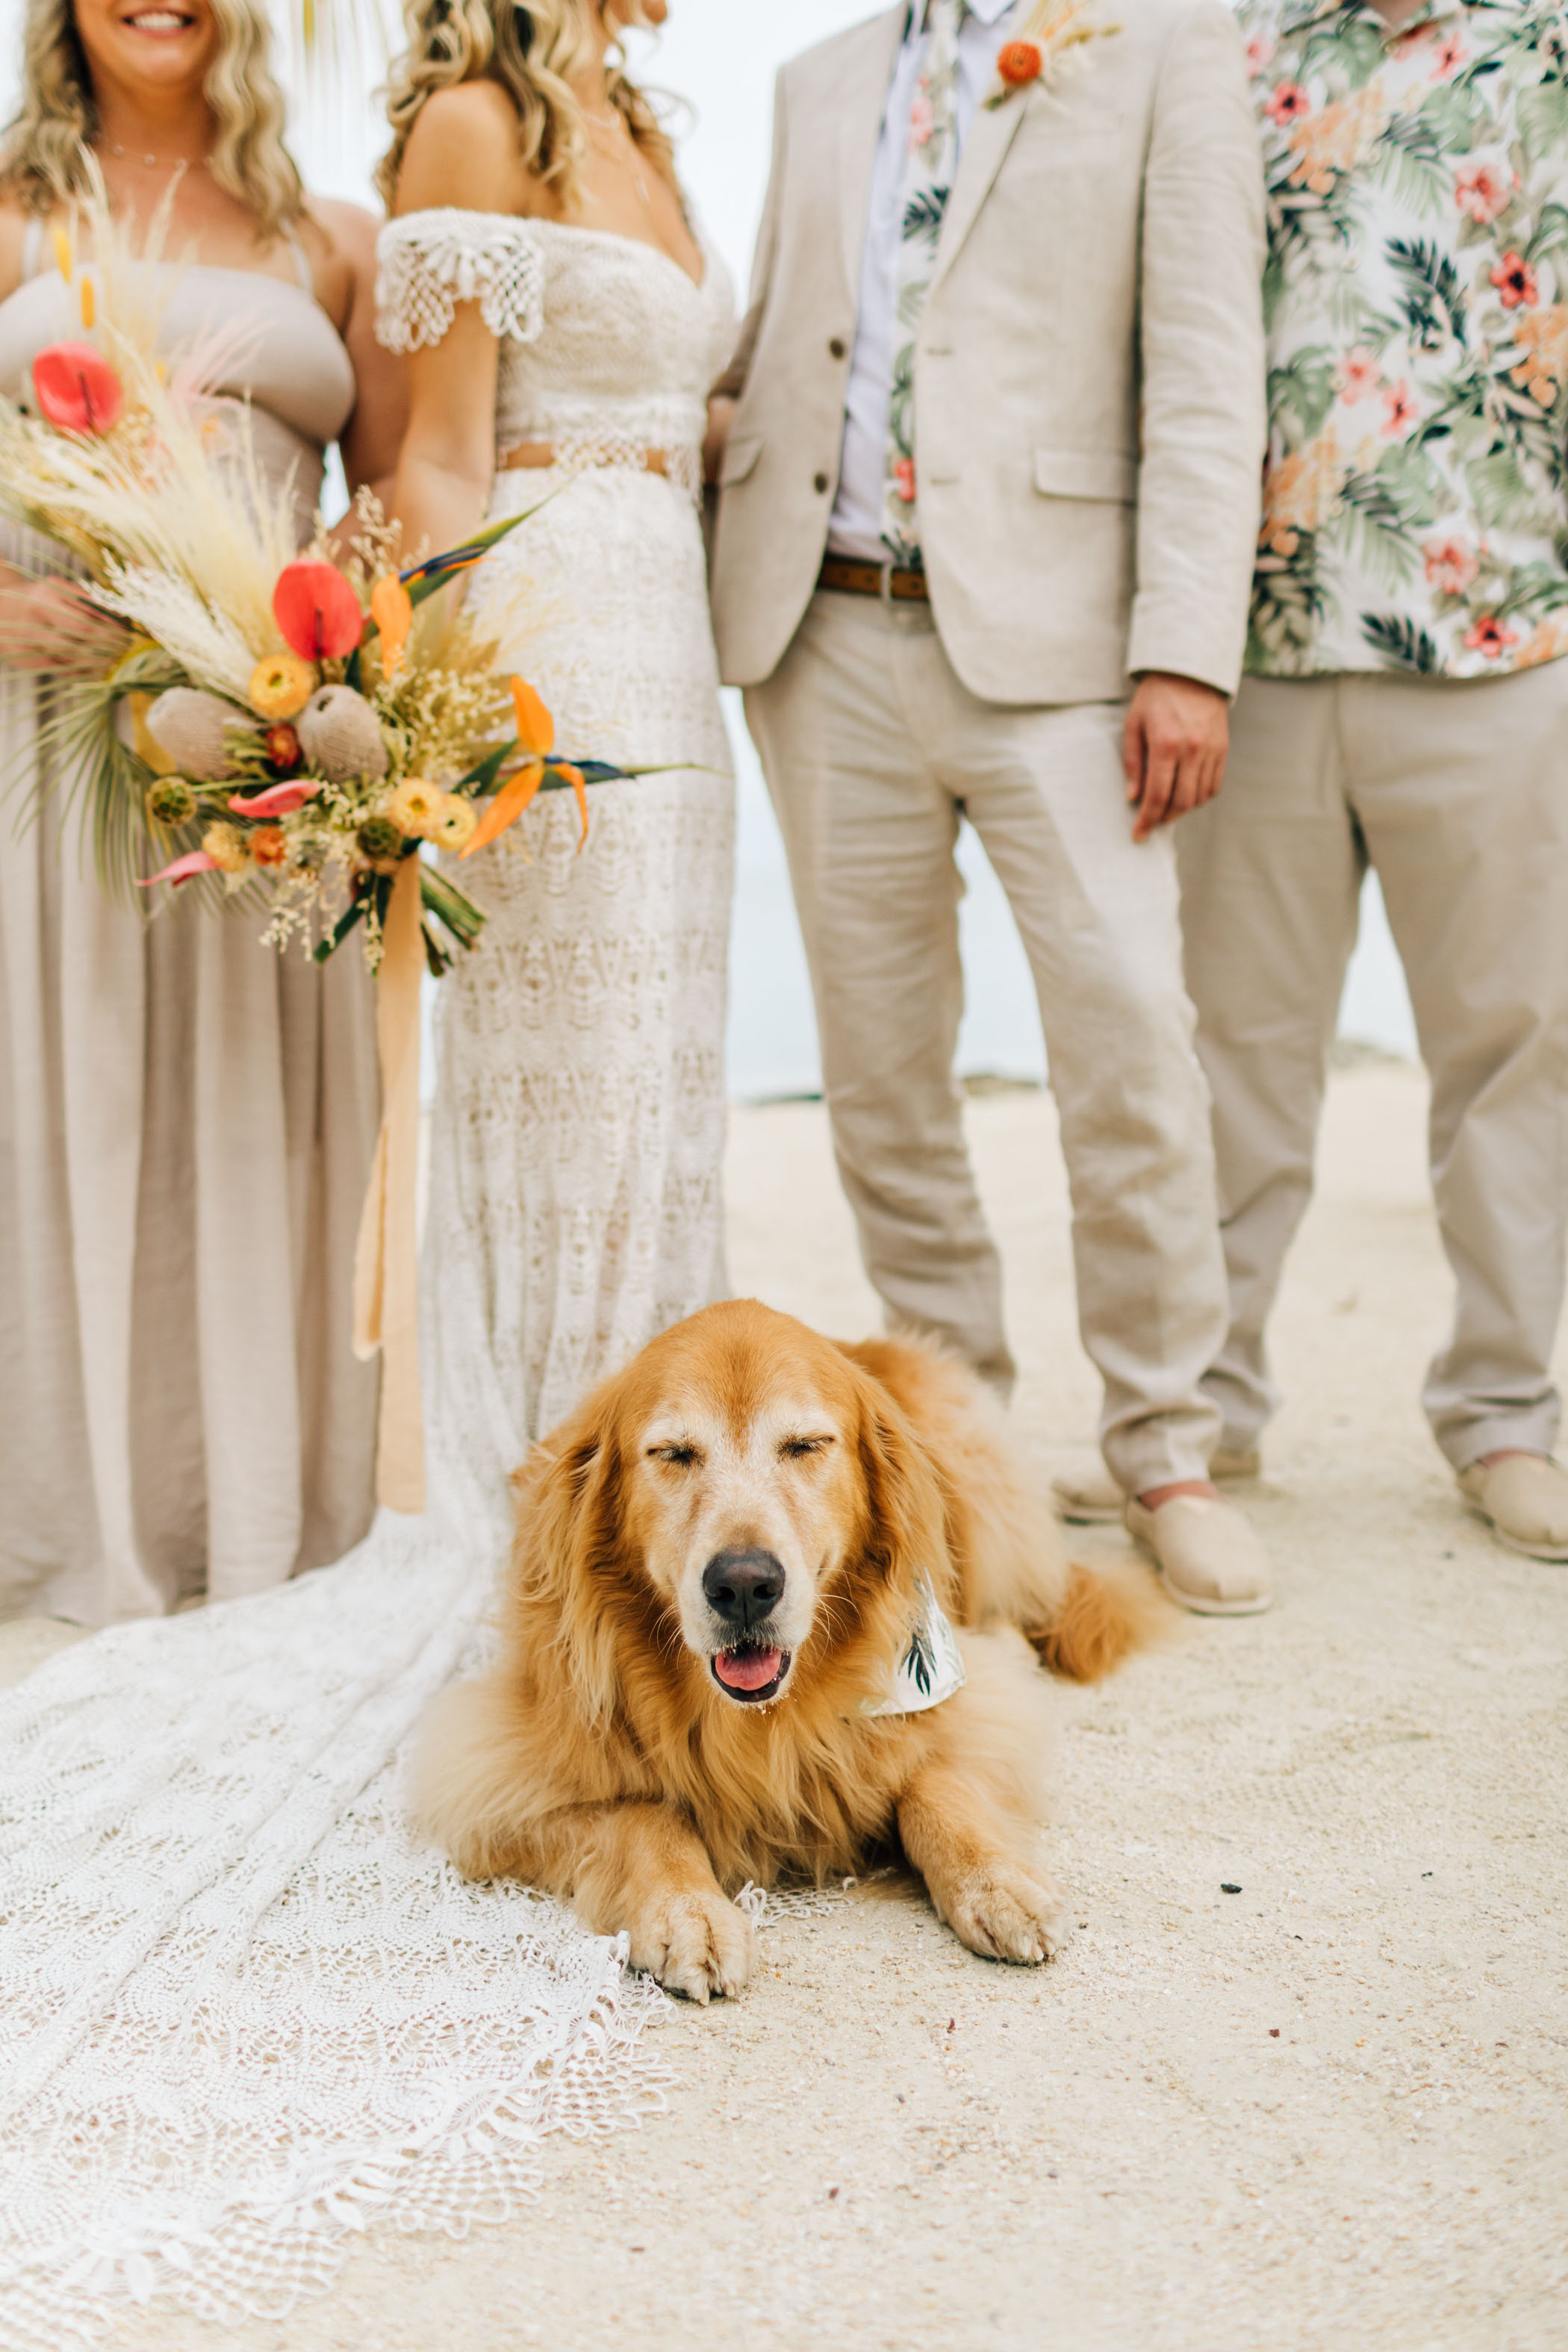 Pup on beach for owner's wedding